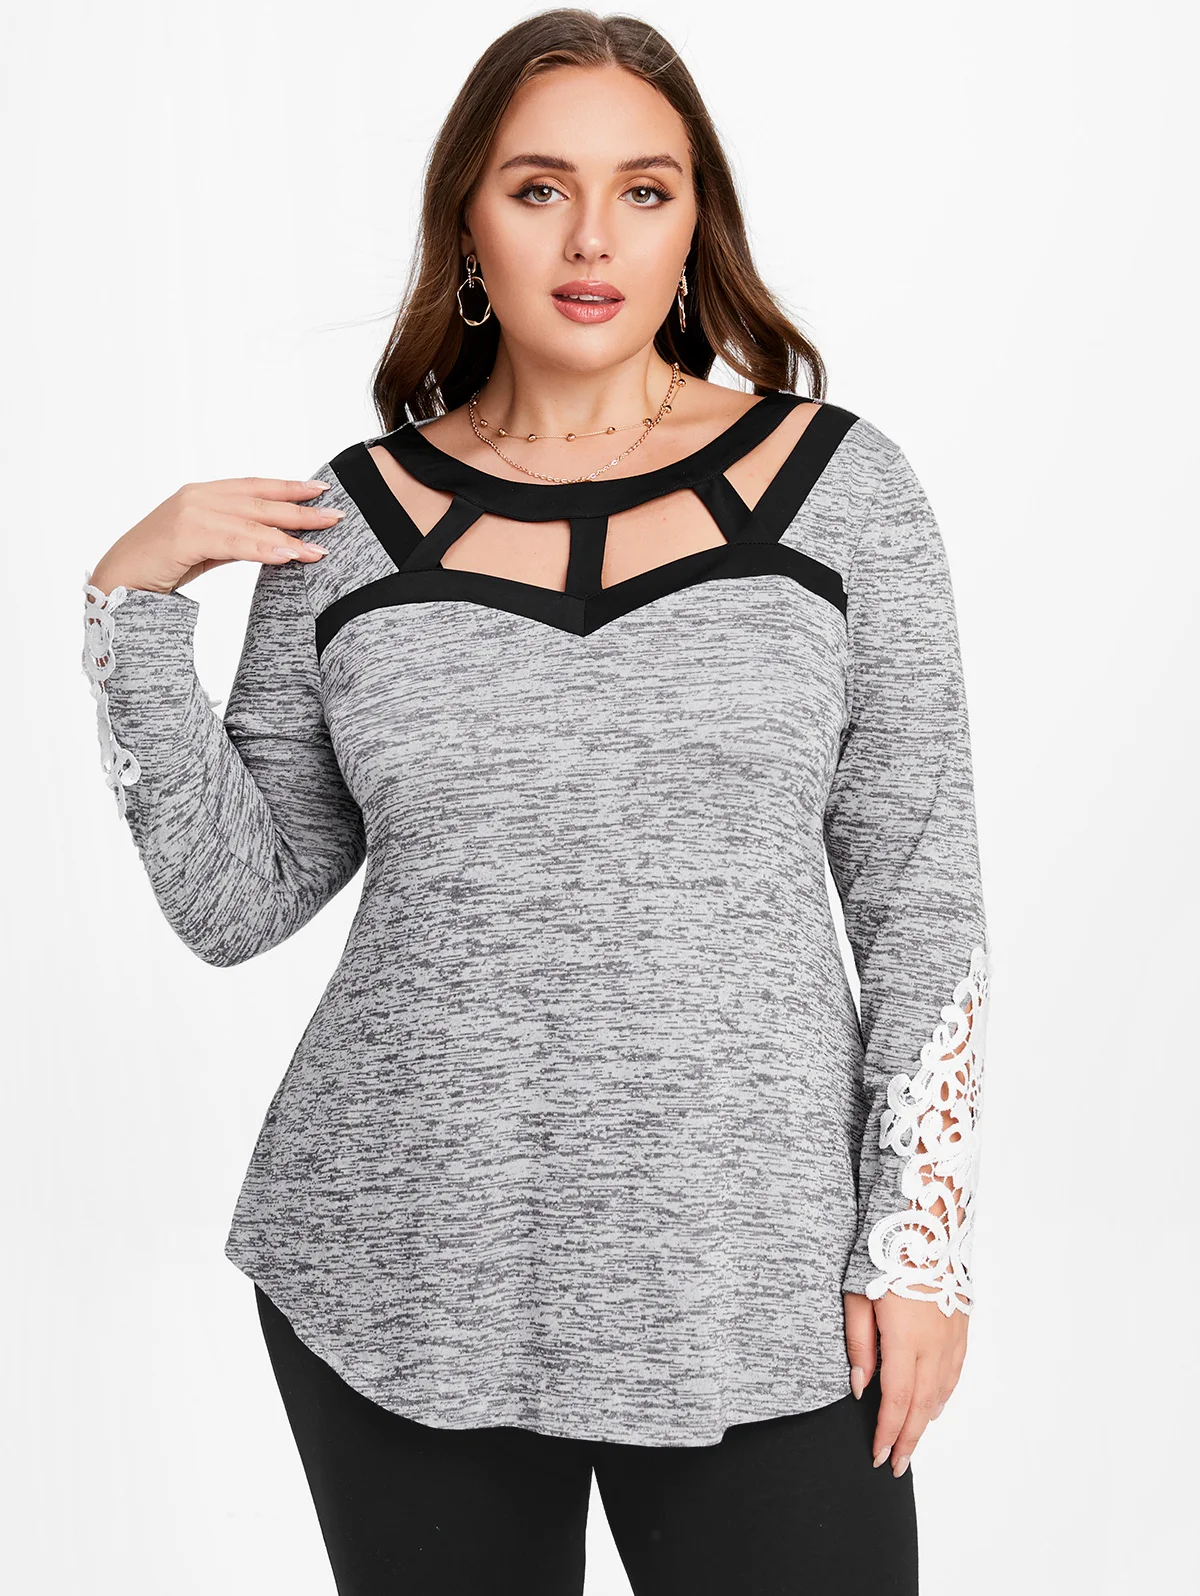 

ROSEGAL Plus Size Cut out Lace Panel T-Shirt Round Neck Space Dye Top Women Spring Autumn Long Sleeves Tees Causal Clothing 4XL